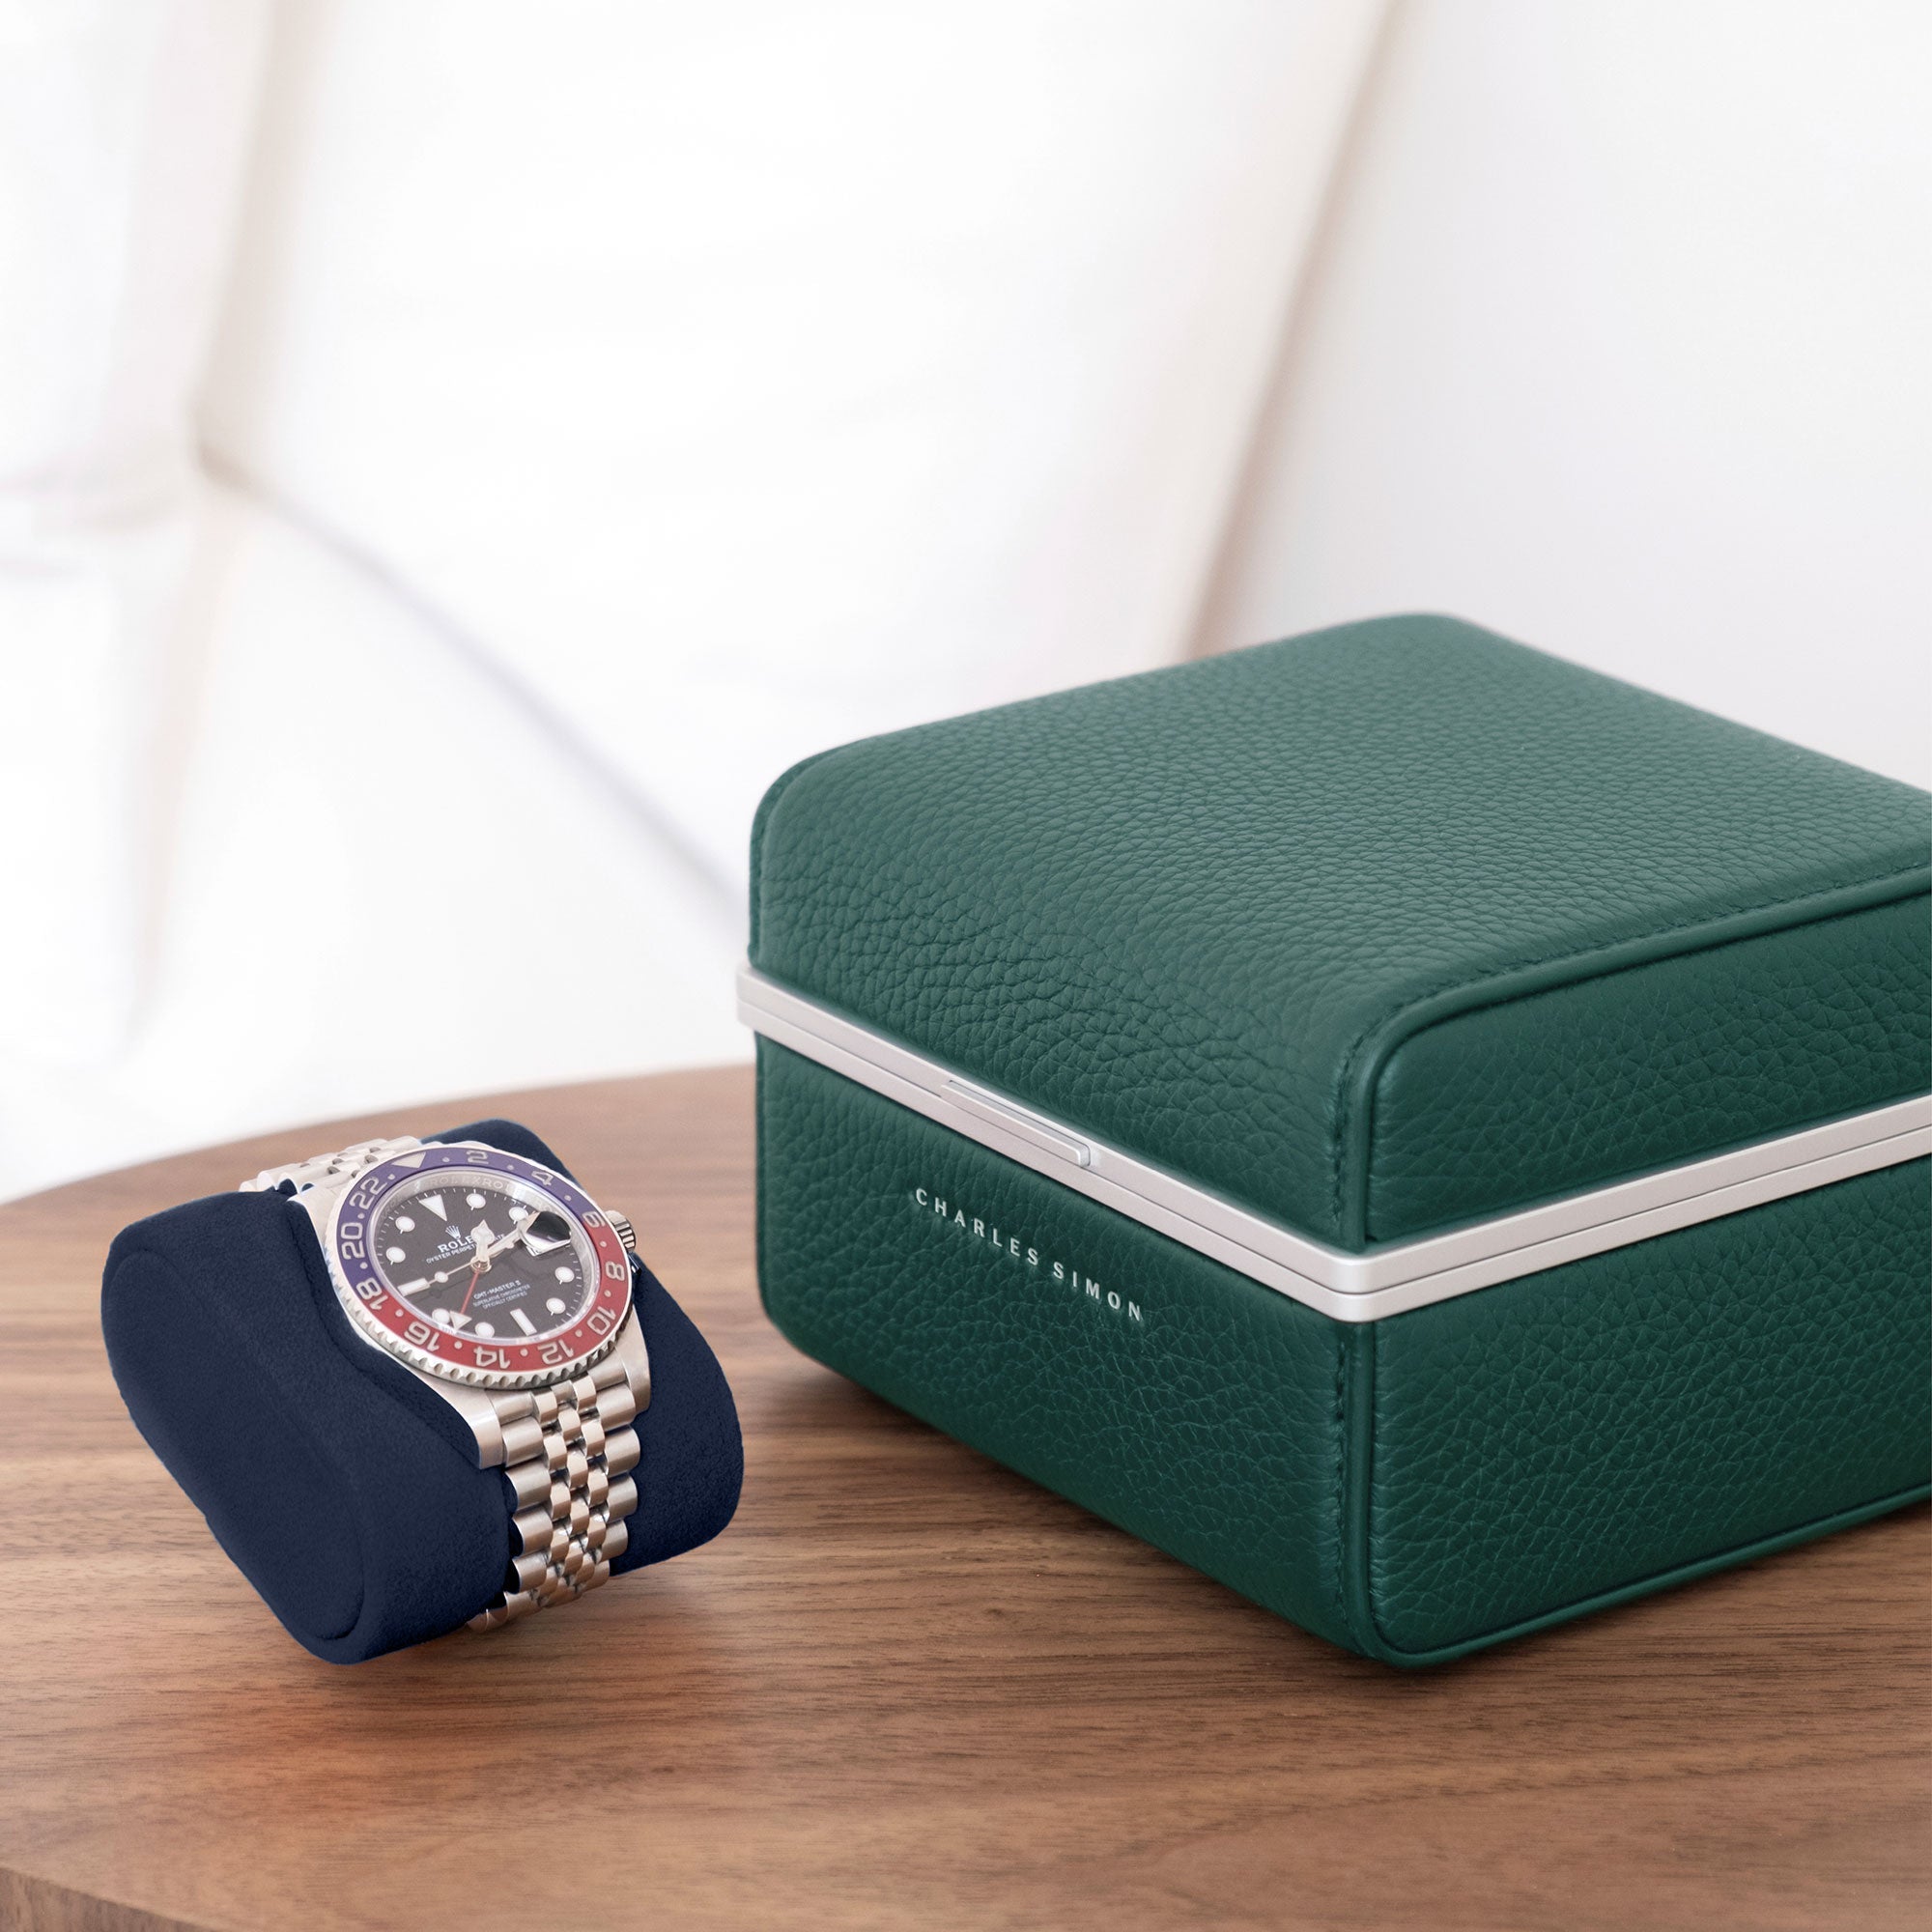 Lifestyle photo of all emerald Eaton 1 Watch case sitting closed on minimalist table. Rolex Pepsi luxury watch is placed on deep blue removable Alcantara cushion next to closed luxury watch case